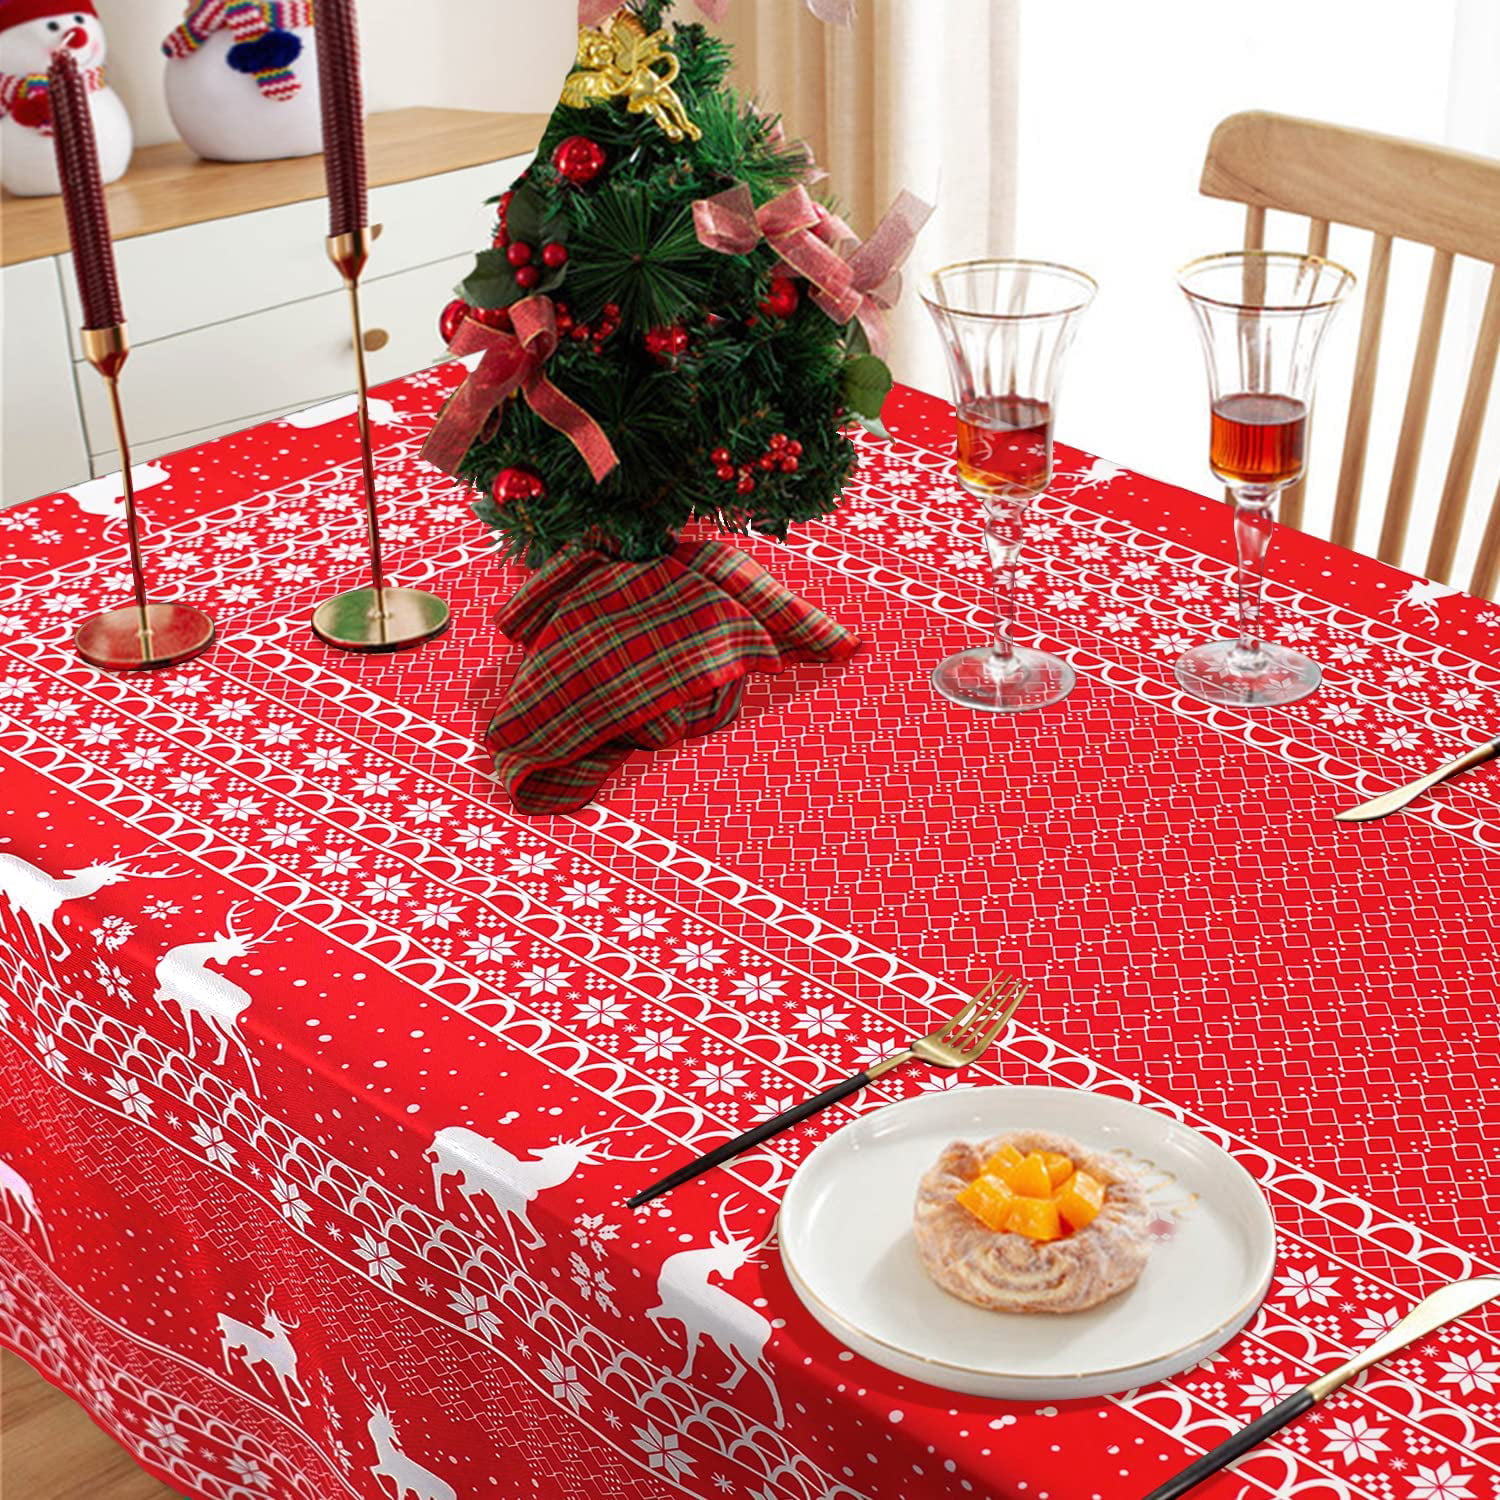 KLL Christmas Plaid Printed Lace Round Table Cloth 60 Diameter Table Cover  for Picnic, Dinning, Home Decor, Table, Party